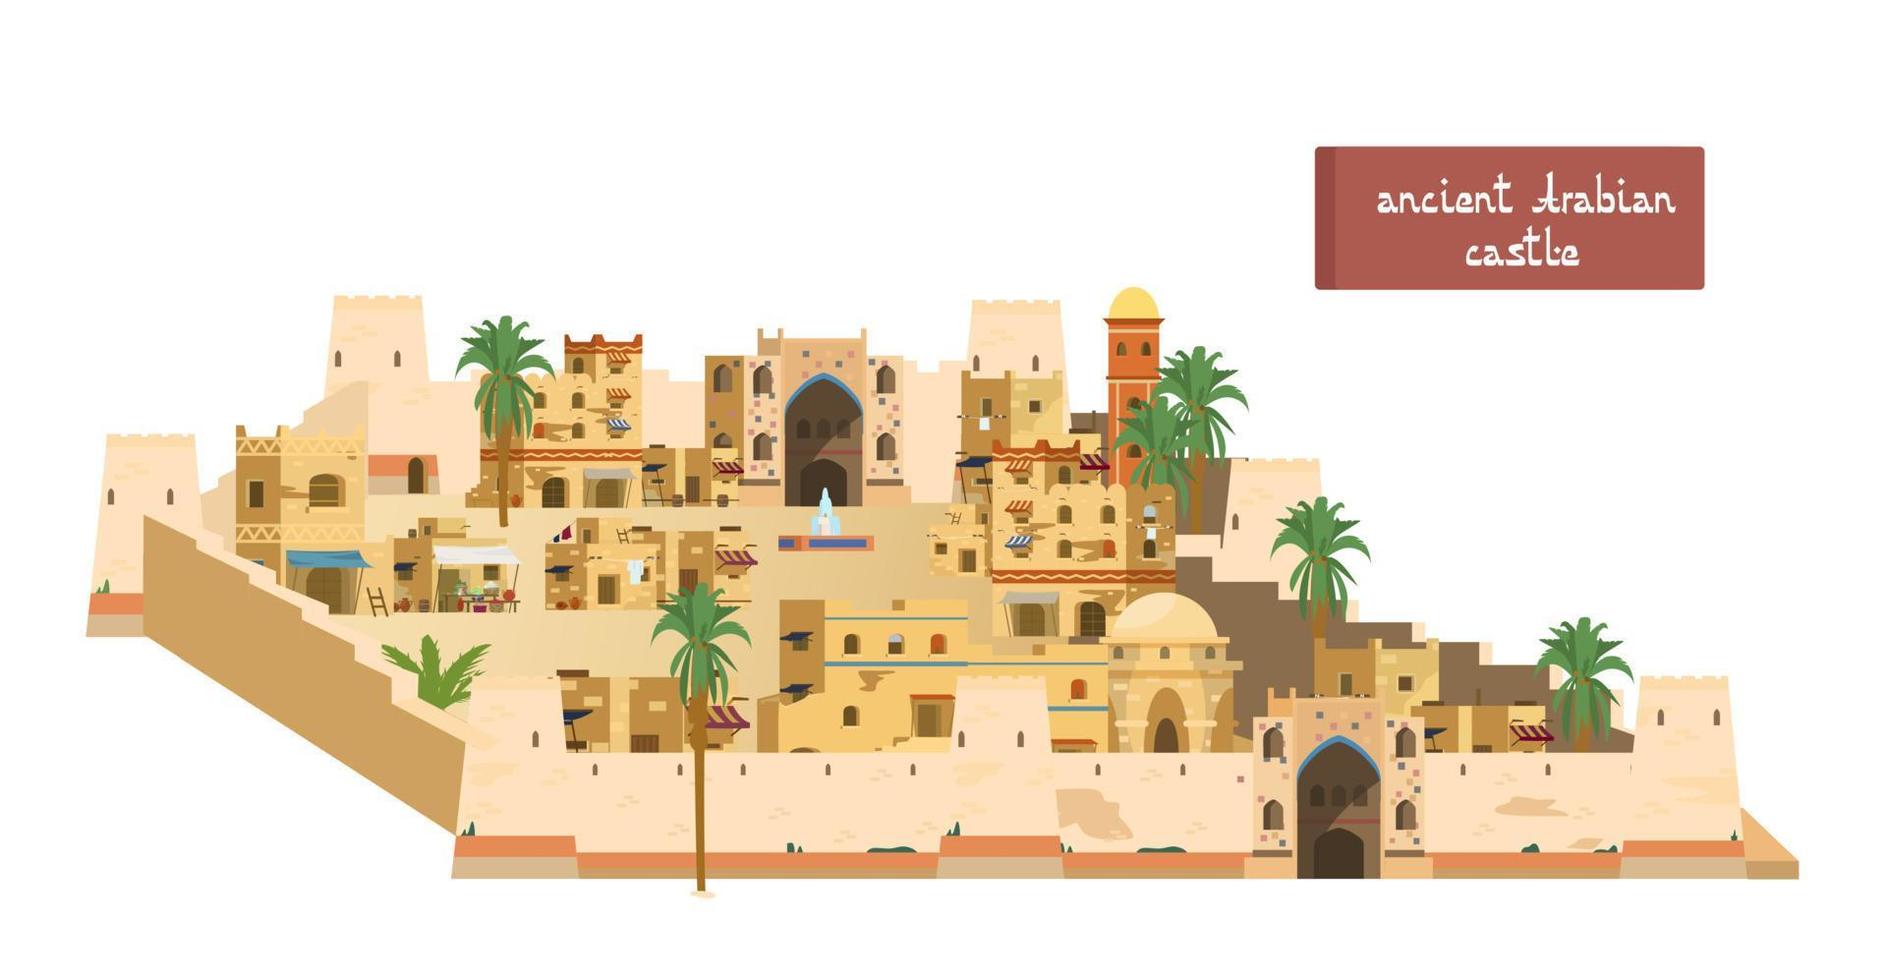 Vector Illustration Of Ancient Araban Castle With Towers, Gates, Mud Brick Houses, Market, Fountain, Palms. Isolated On White.